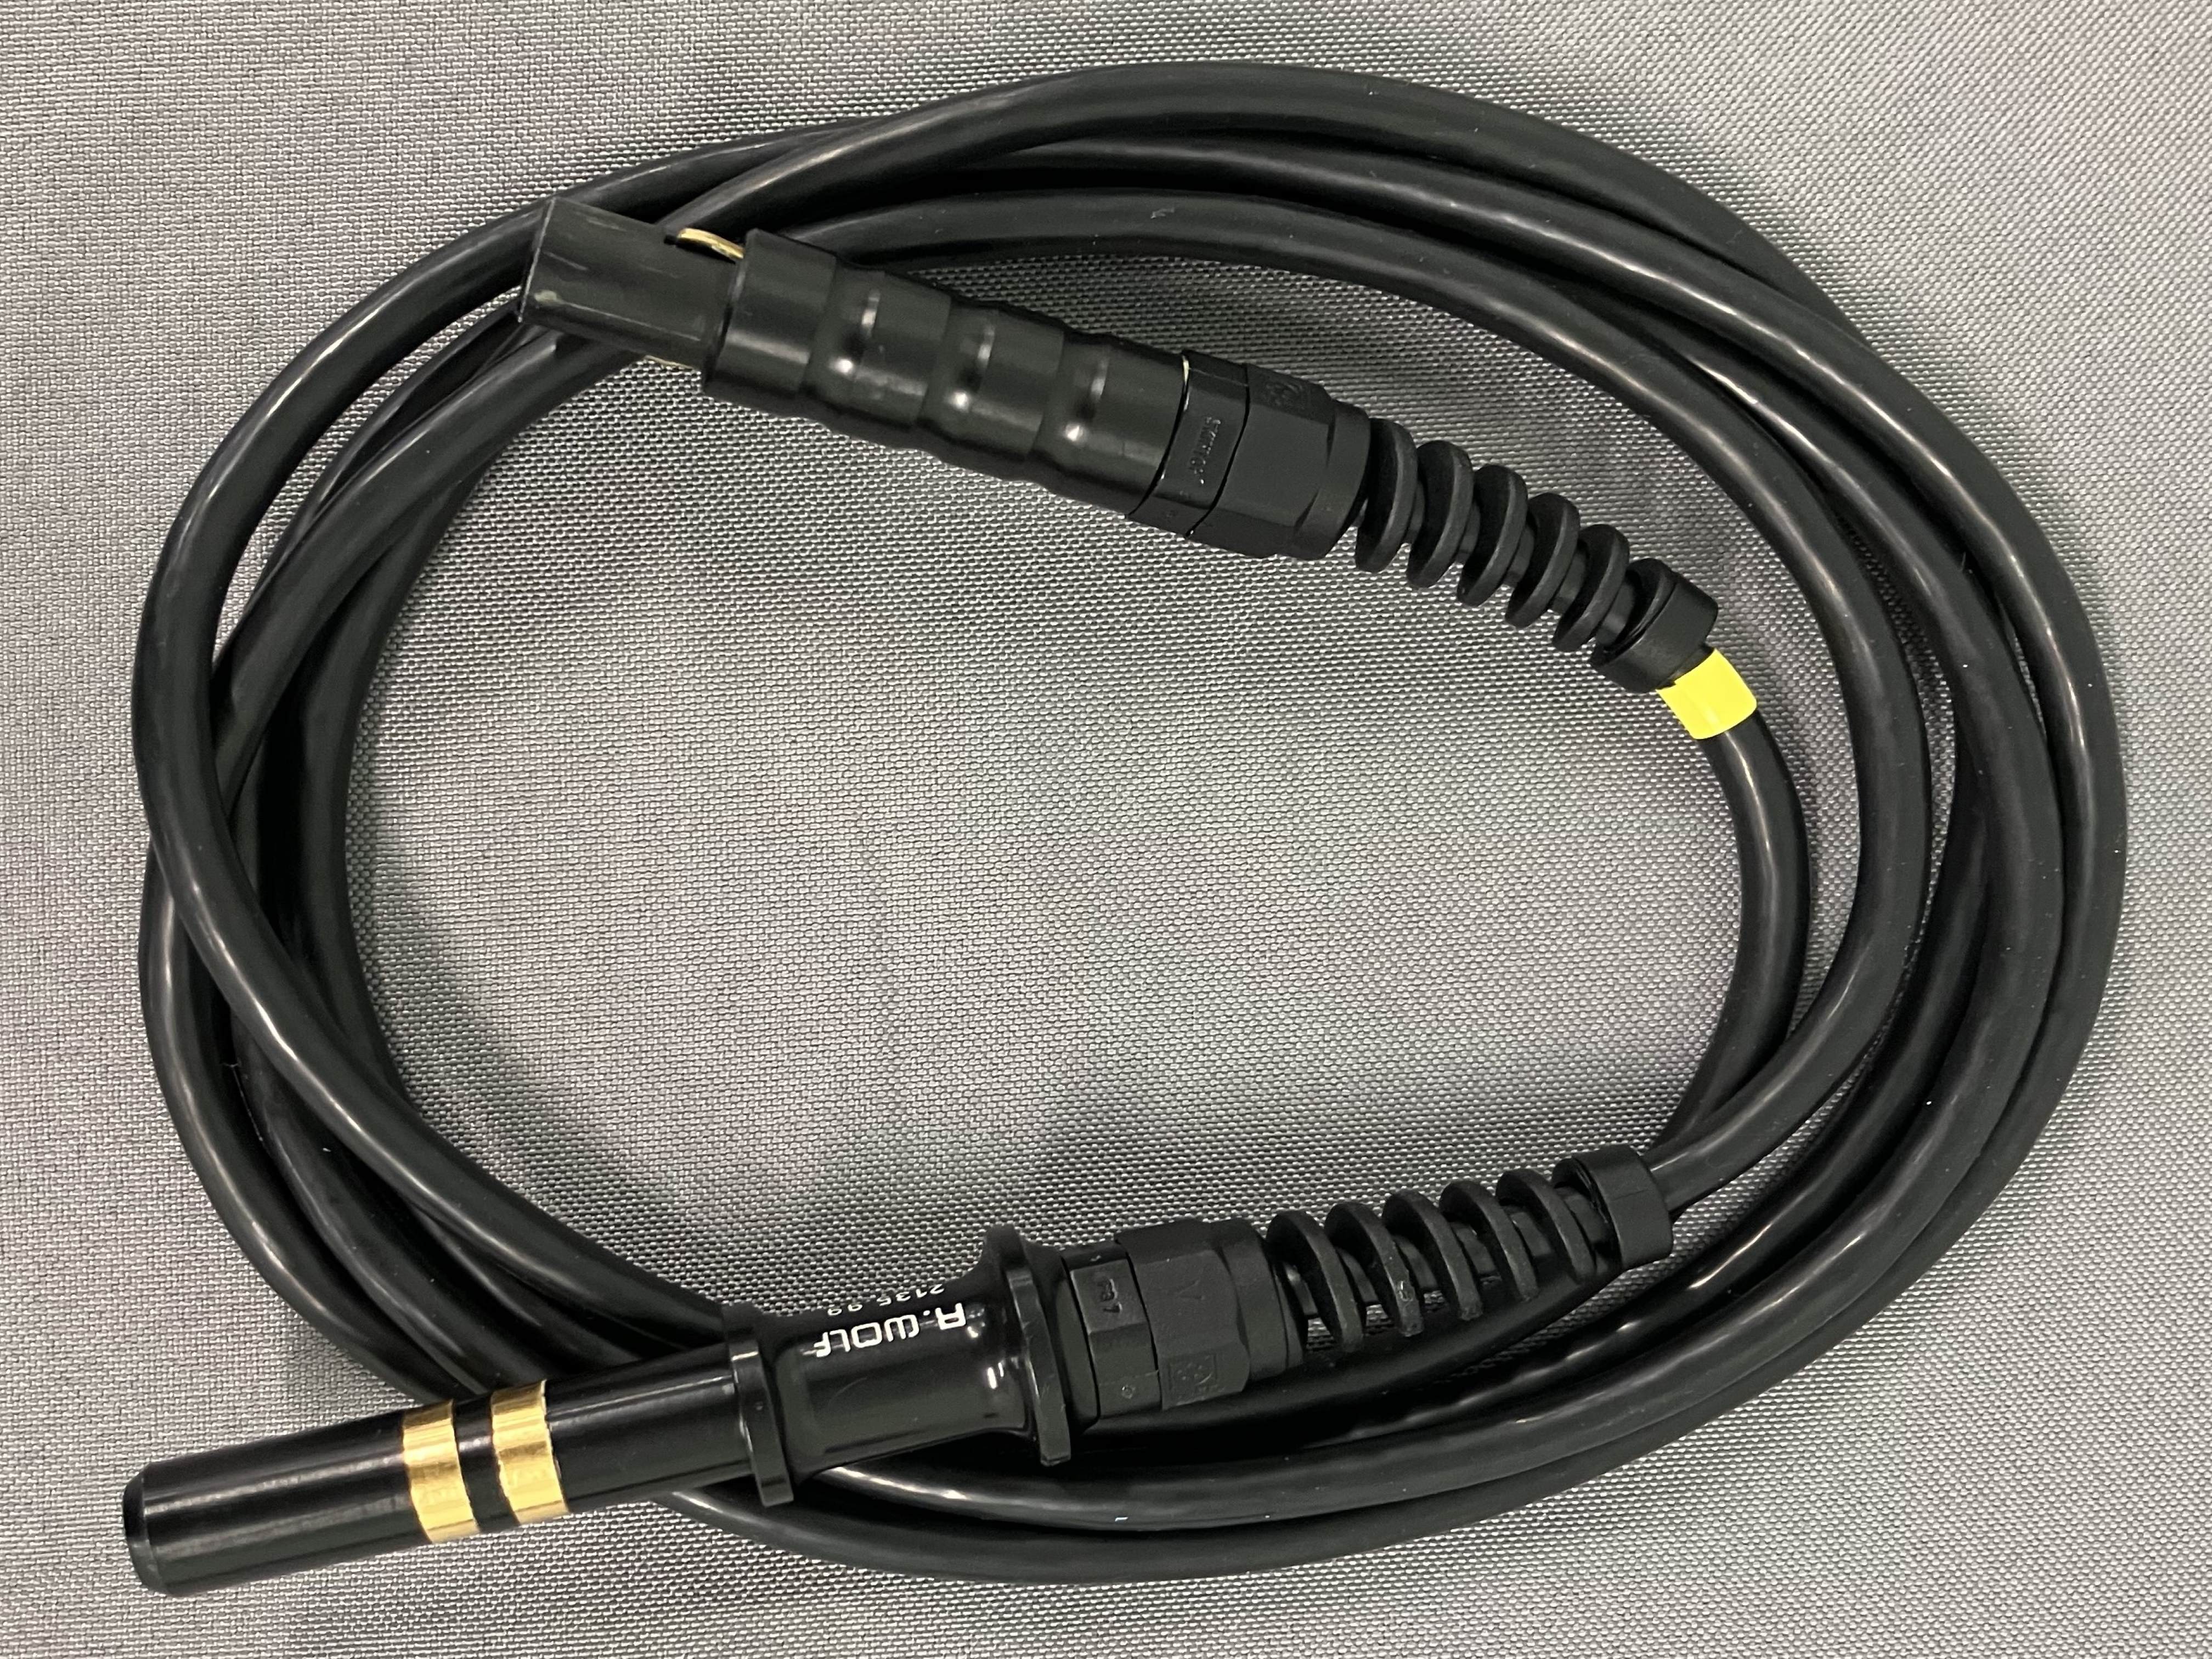 R. Wolf REF: 2135.99 Monopolar Probe Connecting Cable